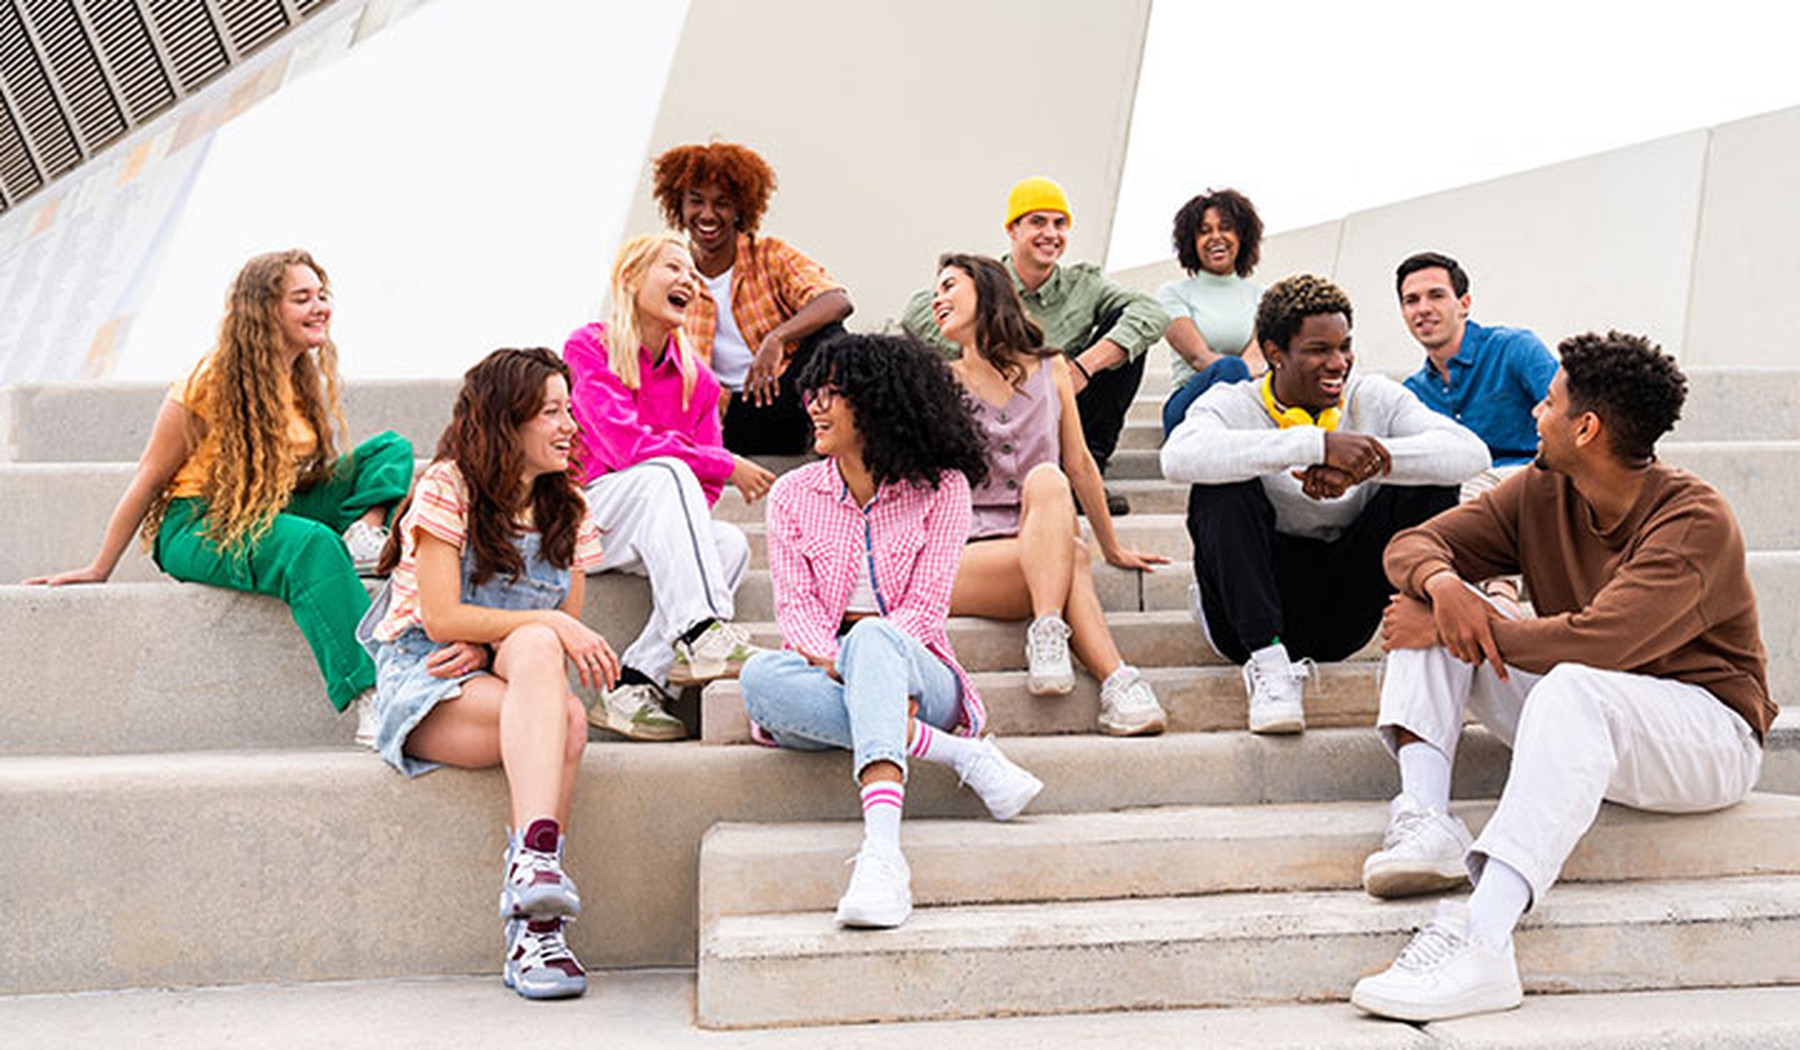 Group of happy teens sitting on stairs wearing casual clothes and sneakers 